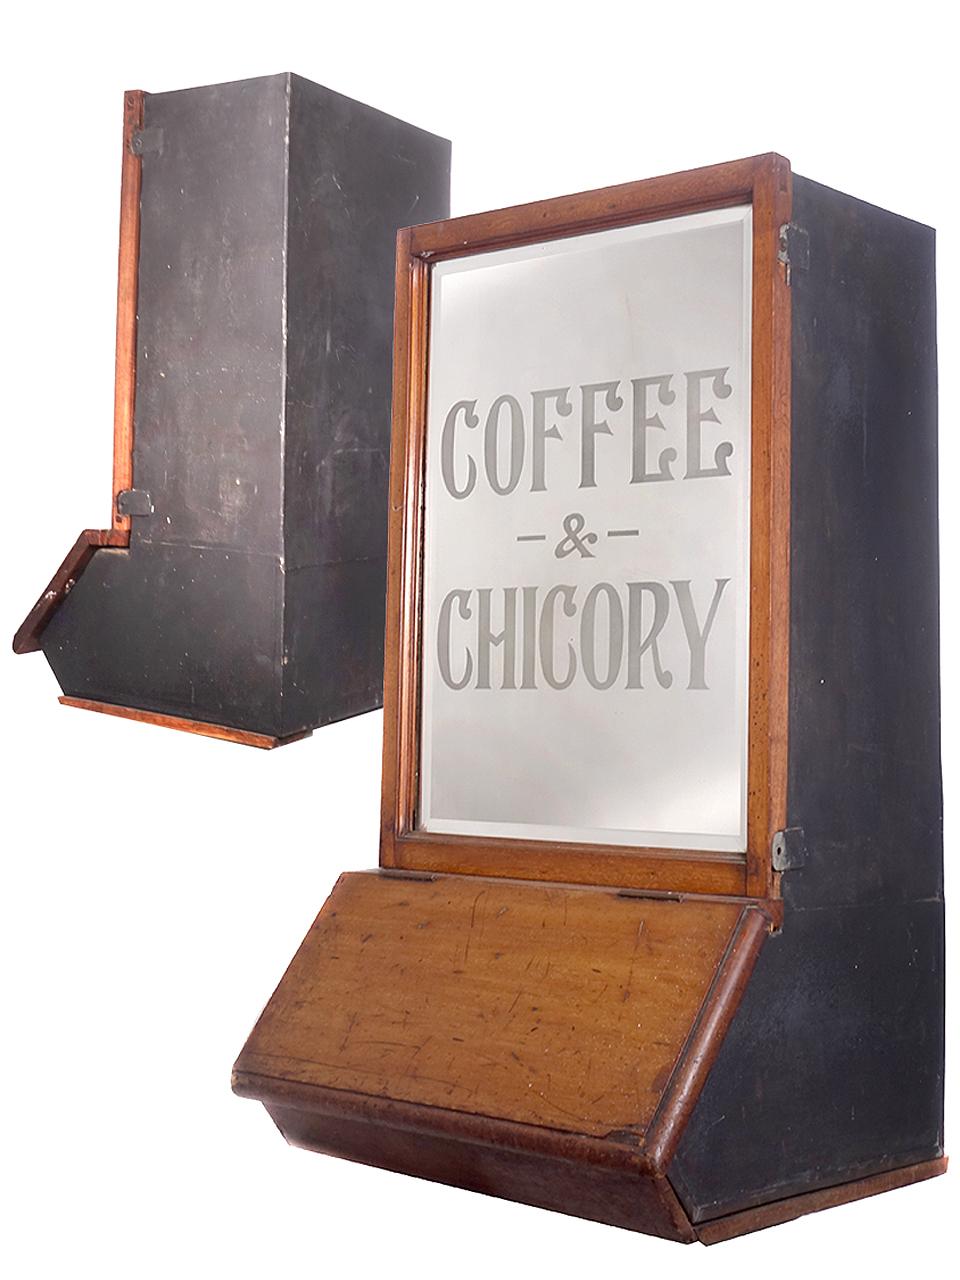 Original back counter coffee bean cabinets are impossible to find. This is a nice all original matching pair. The mirrors are beveled and read... fine blend... coffee and chicory. There is a tin lid that opens the top for filling and a slant wood